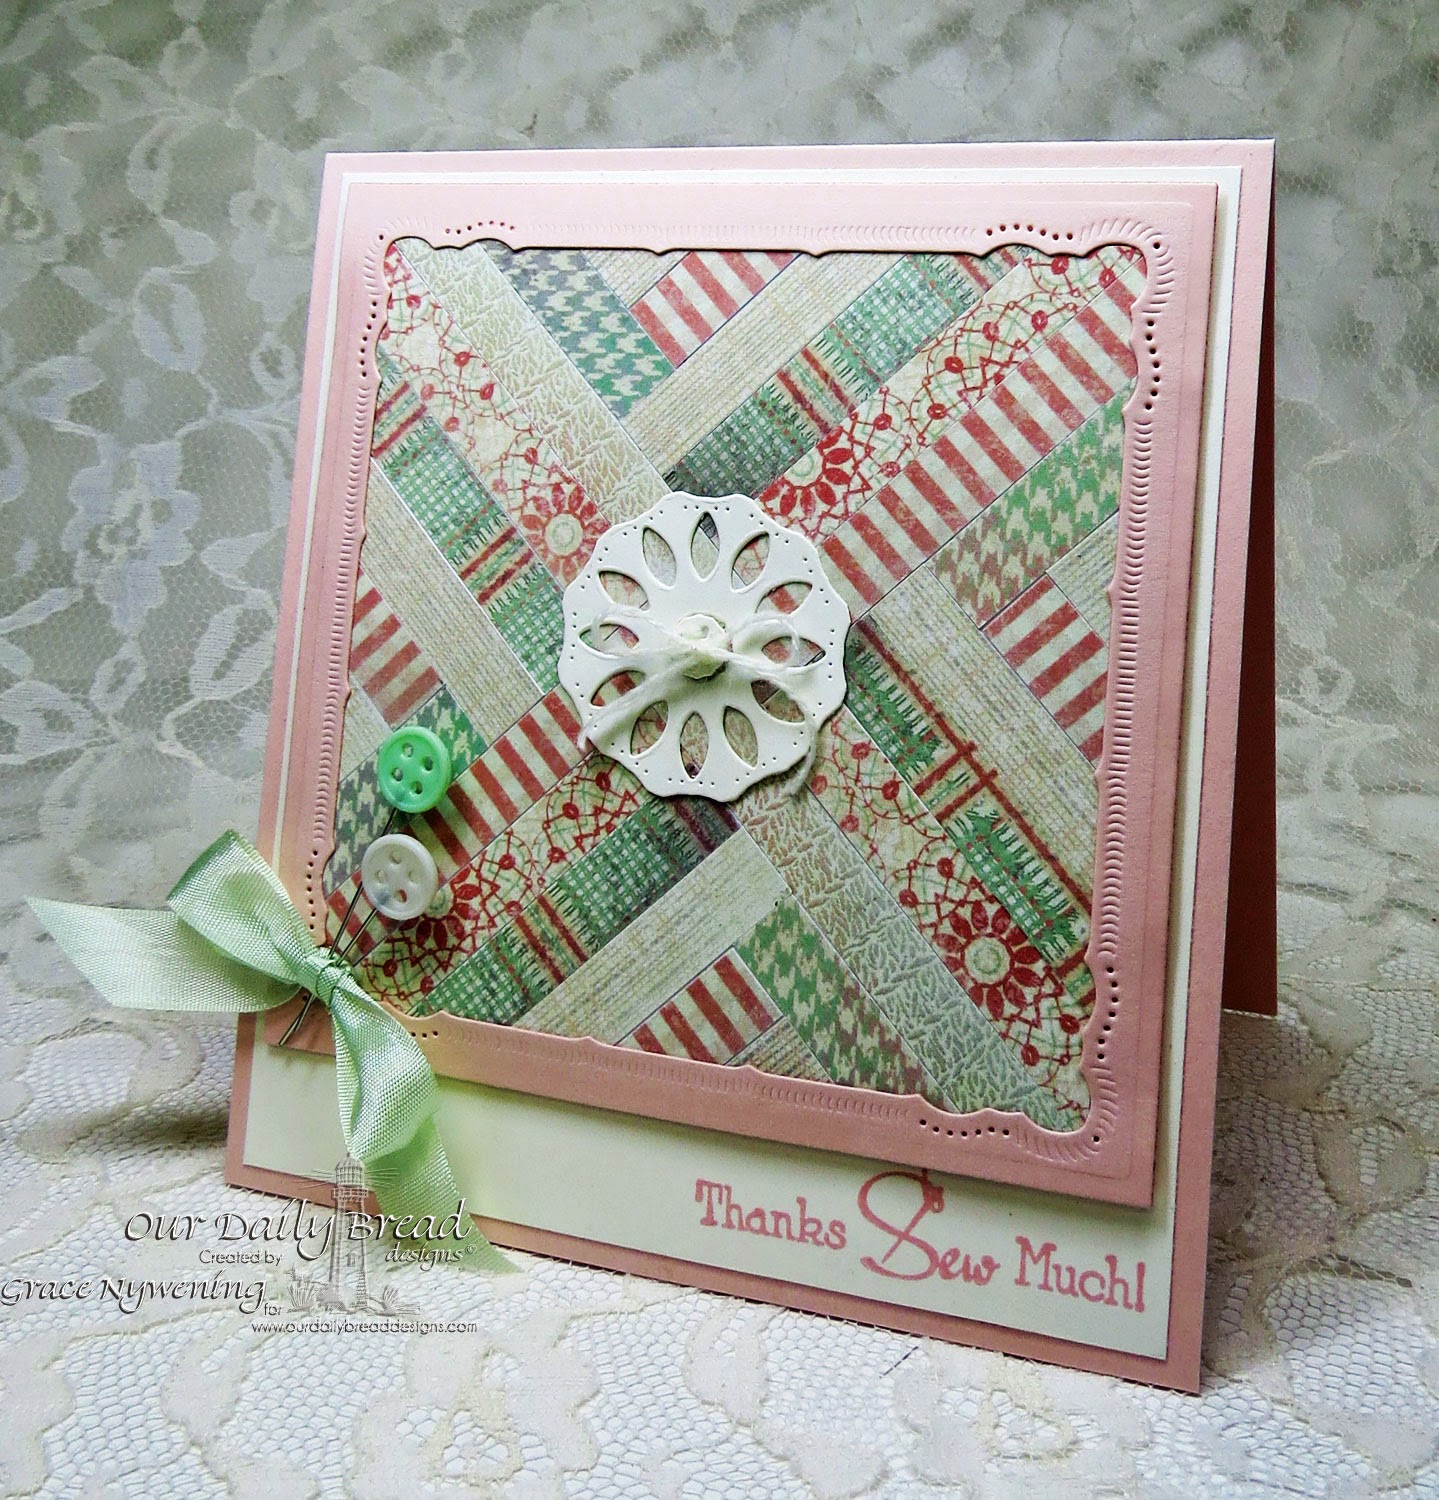 ODBD Stamps and dies: Quilts, Doily Die, designed by Grace Nywening